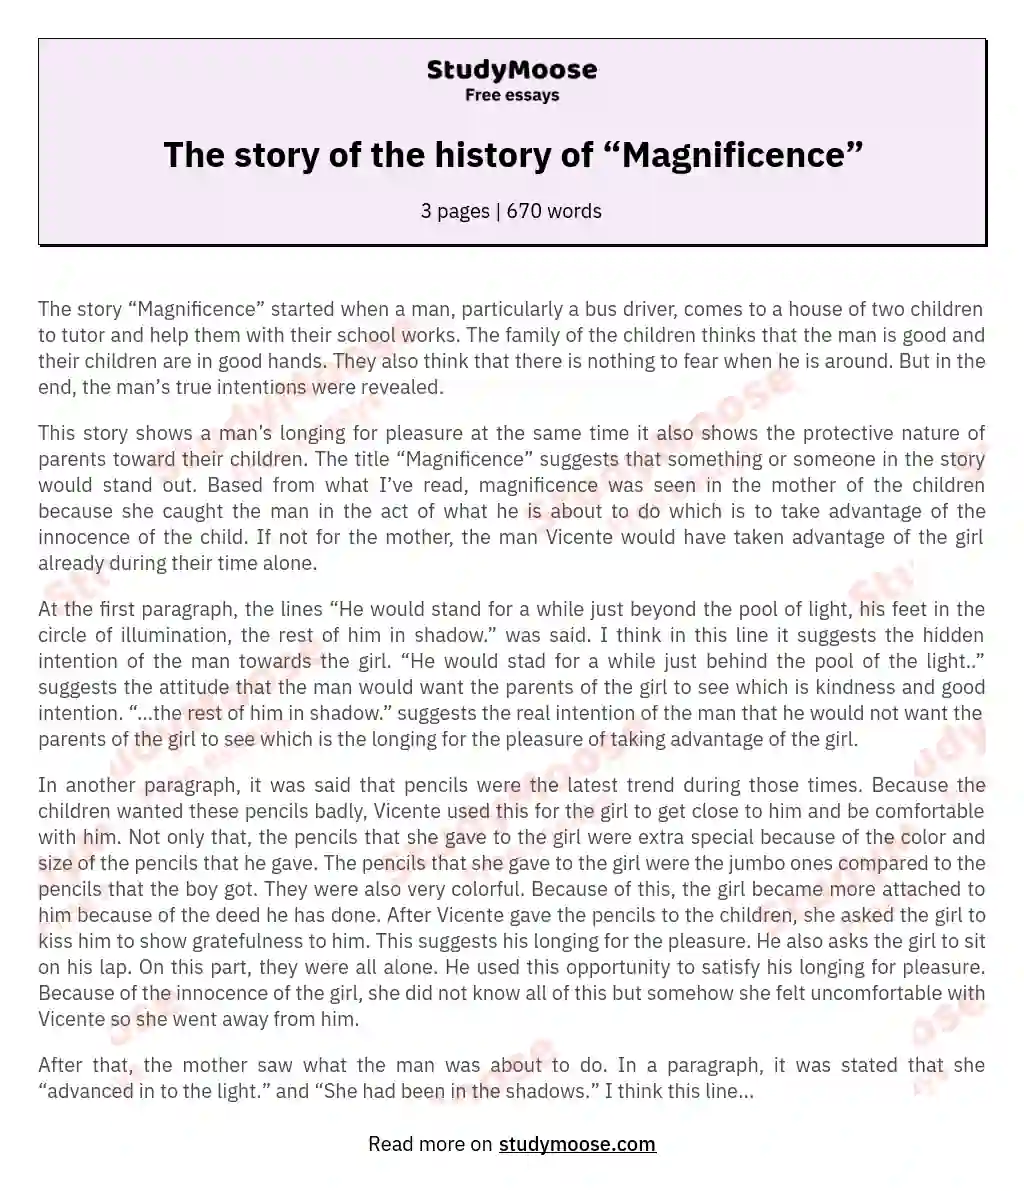 The story of the history of “Magnificence” essay